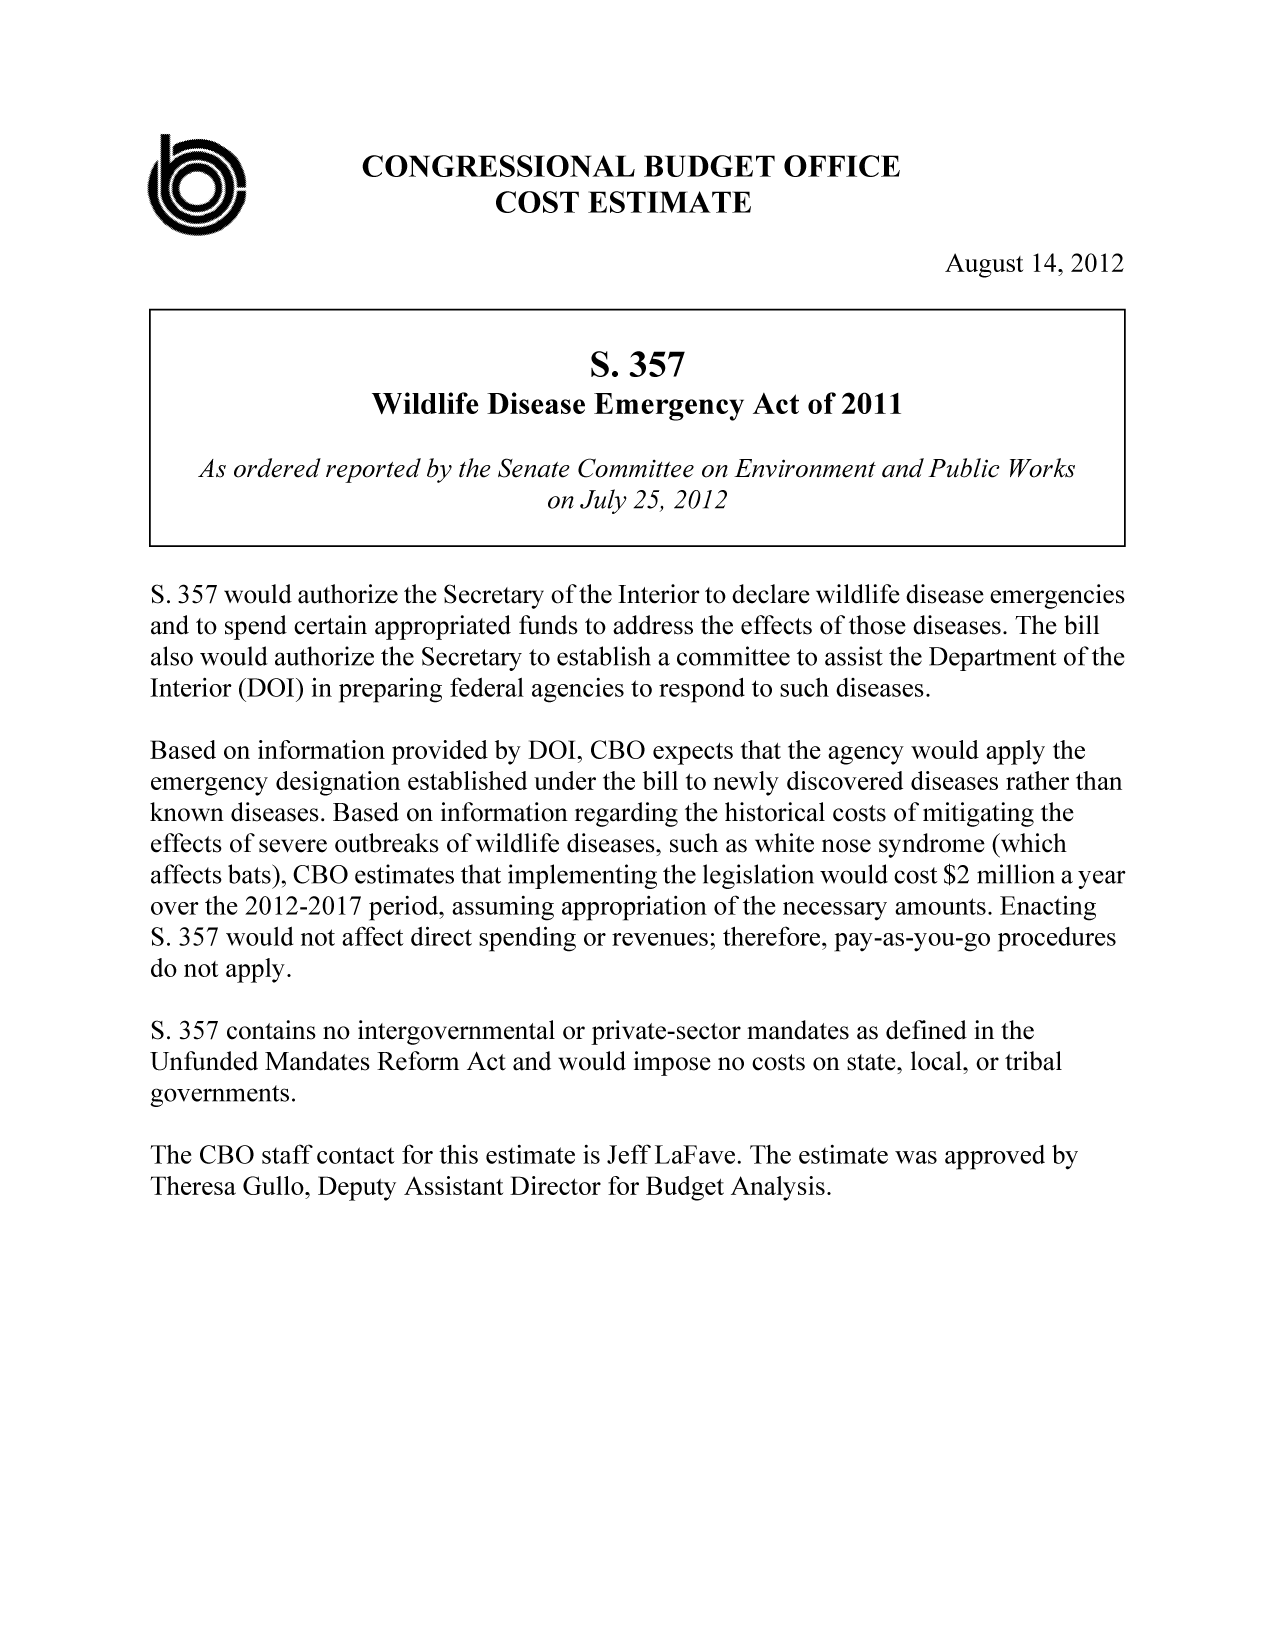 handle is hein.congrec/cbo10870 and id is 1 raw text is: CONGRESSIONAL BUDGET OFFICE
COST ESTIMATE
August 14, 2012
S. 357
Wildlife Disease Emergency Act of 2011
As ordered reported by the Senate Committee on Environment and Public Works
on July 25, 2012
S. 357 would authorize the Secretary of the Interior to declare wildlife disease emergencies
and to spend certain appropriated funds to address the effects of those diseases. The bill
also would authorize the Secretary to establish a committee to assist the Department of the
Interior (DOI) in preparing federal agencies to respond to such diseases.
Based on information provided by DOI, CBO expects that the agency would apply the
emergency designation established under the bill to newly discovered diseases rather than
known diseases. Based on information regarding the historical costs of mitigating the
effects of severe outbreaks of wildlife diseases, such as white nose syndrome (which
affects bats), CBO estimates that implementing the legislation would cost $2 million a year
over the 2012-2017 period, assuming appropriation of the necessary amounts. Enacting
S. 357 would not affect direct spending or revenues; therefore, pay-as-you-go procedures
do not apply.
S. 357 contains no intergovernmental or private-sector mandates as defined in the
Unfunded Mandates Reform Act and would impose no costs on state, local, or tribal
governments.
The CBO staff contact for this estimate is Jeff LaFave. The estimate was approved by
Theresa Gullo, Deputy Assistant Director for Budget Analysis.


